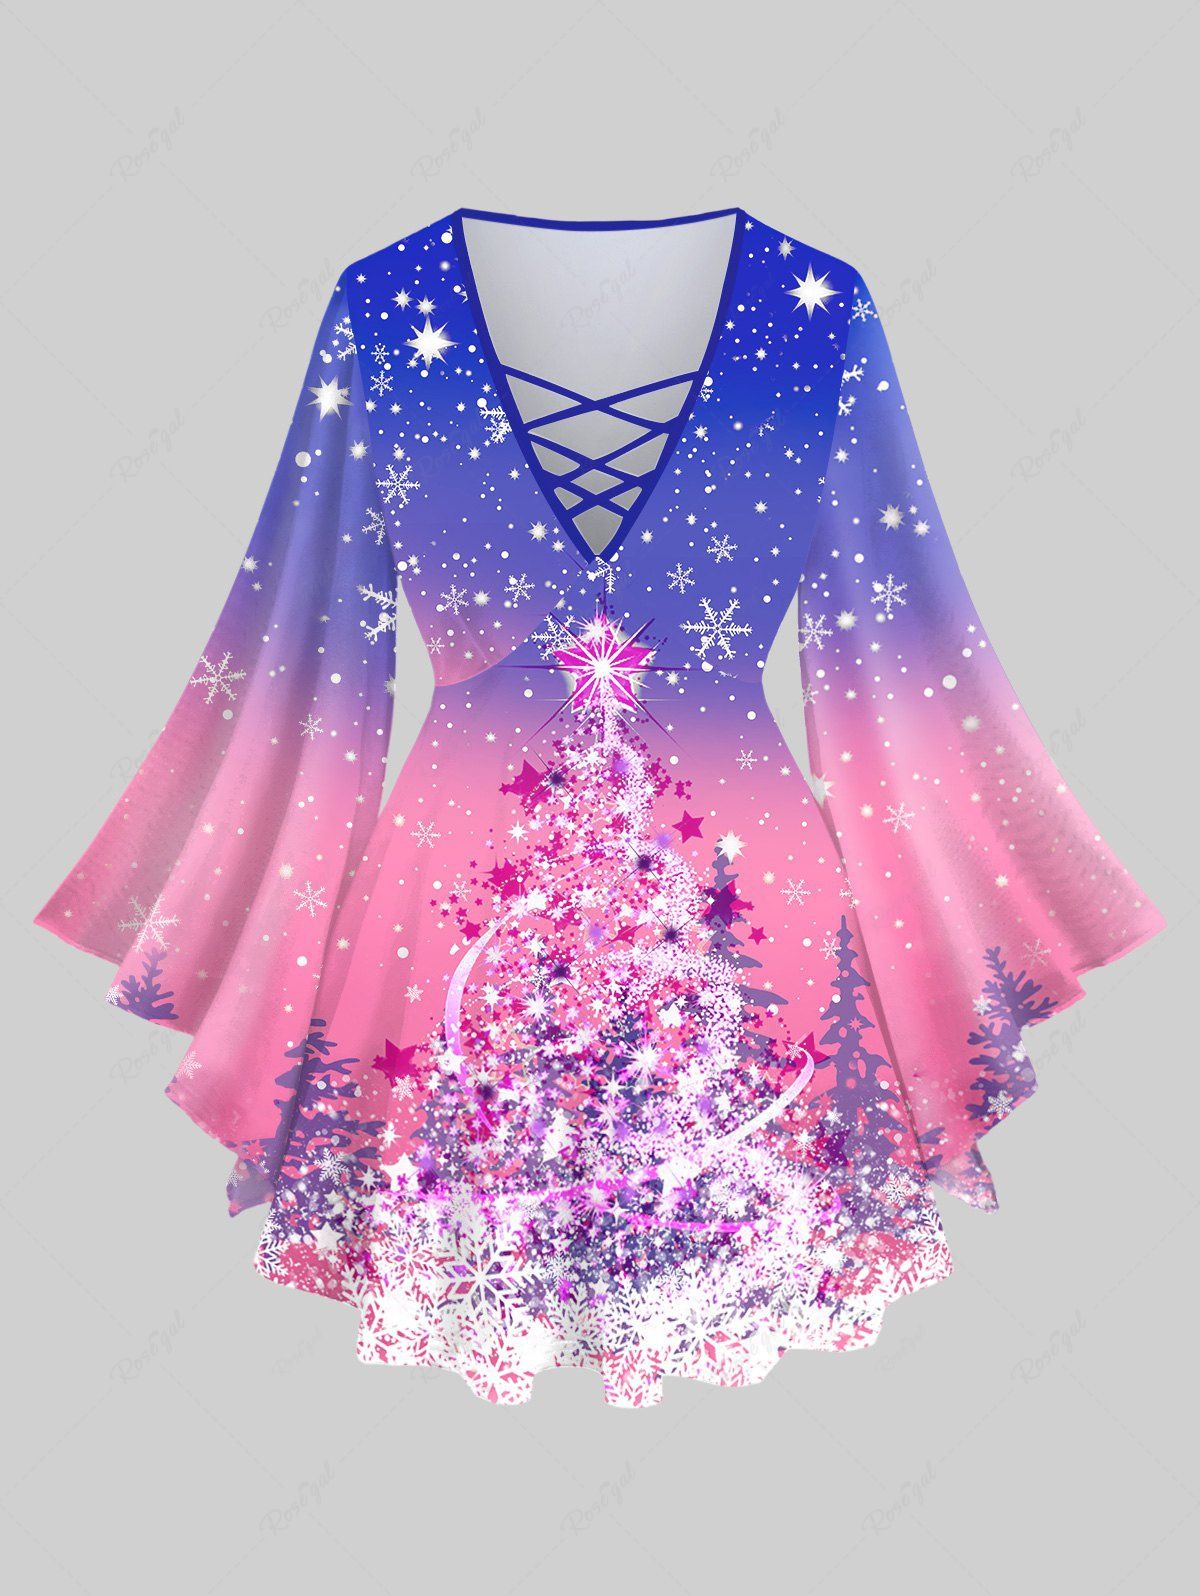 Outfit Plus Size Christmas Tree Star Snowflake Ombre Glitter 3D Print Lattice Crisscross Bell Sleeves T-shirt  